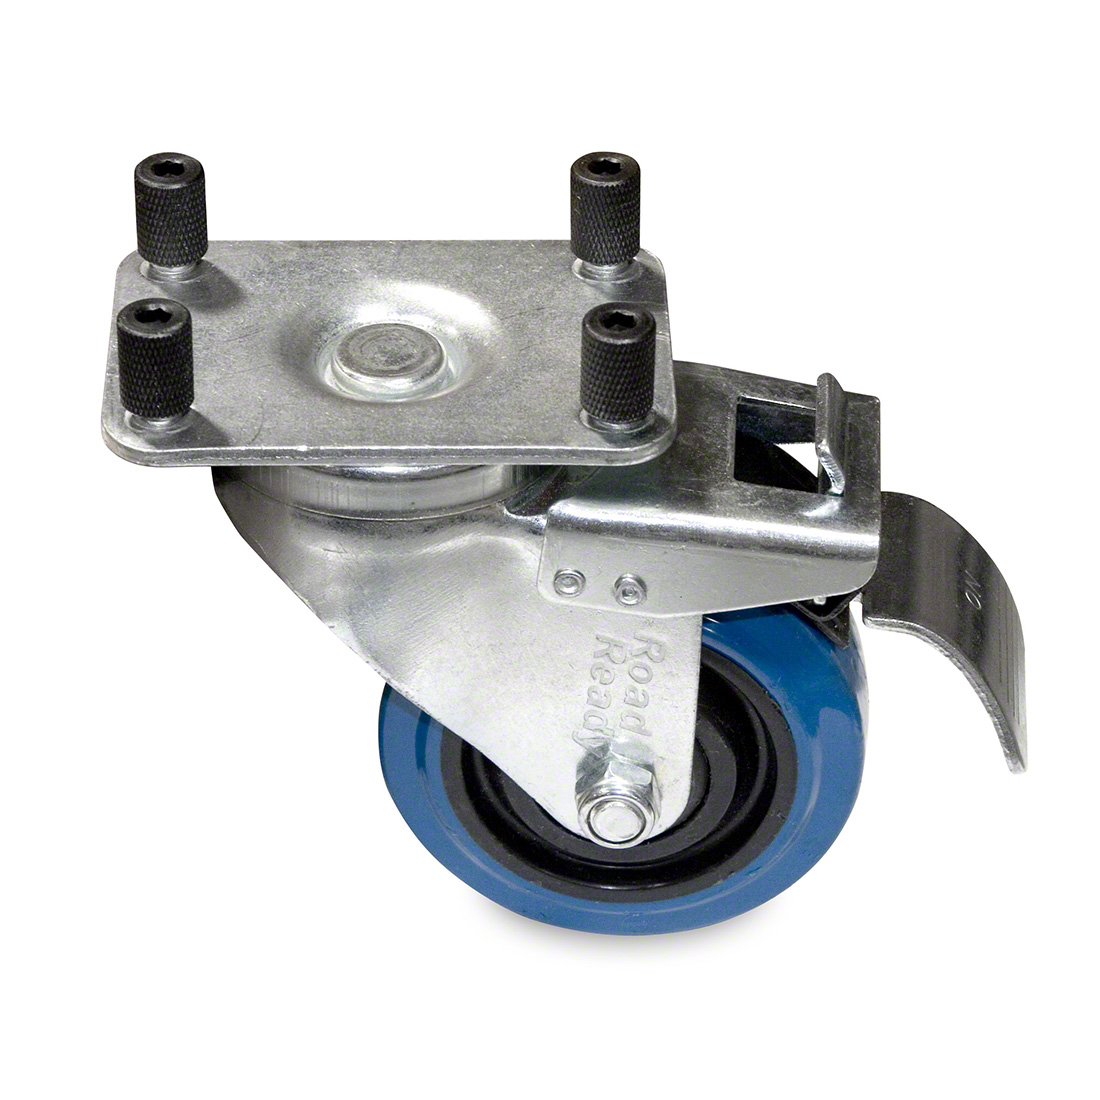 IntelliStage Casters with Brakes (4-pack)